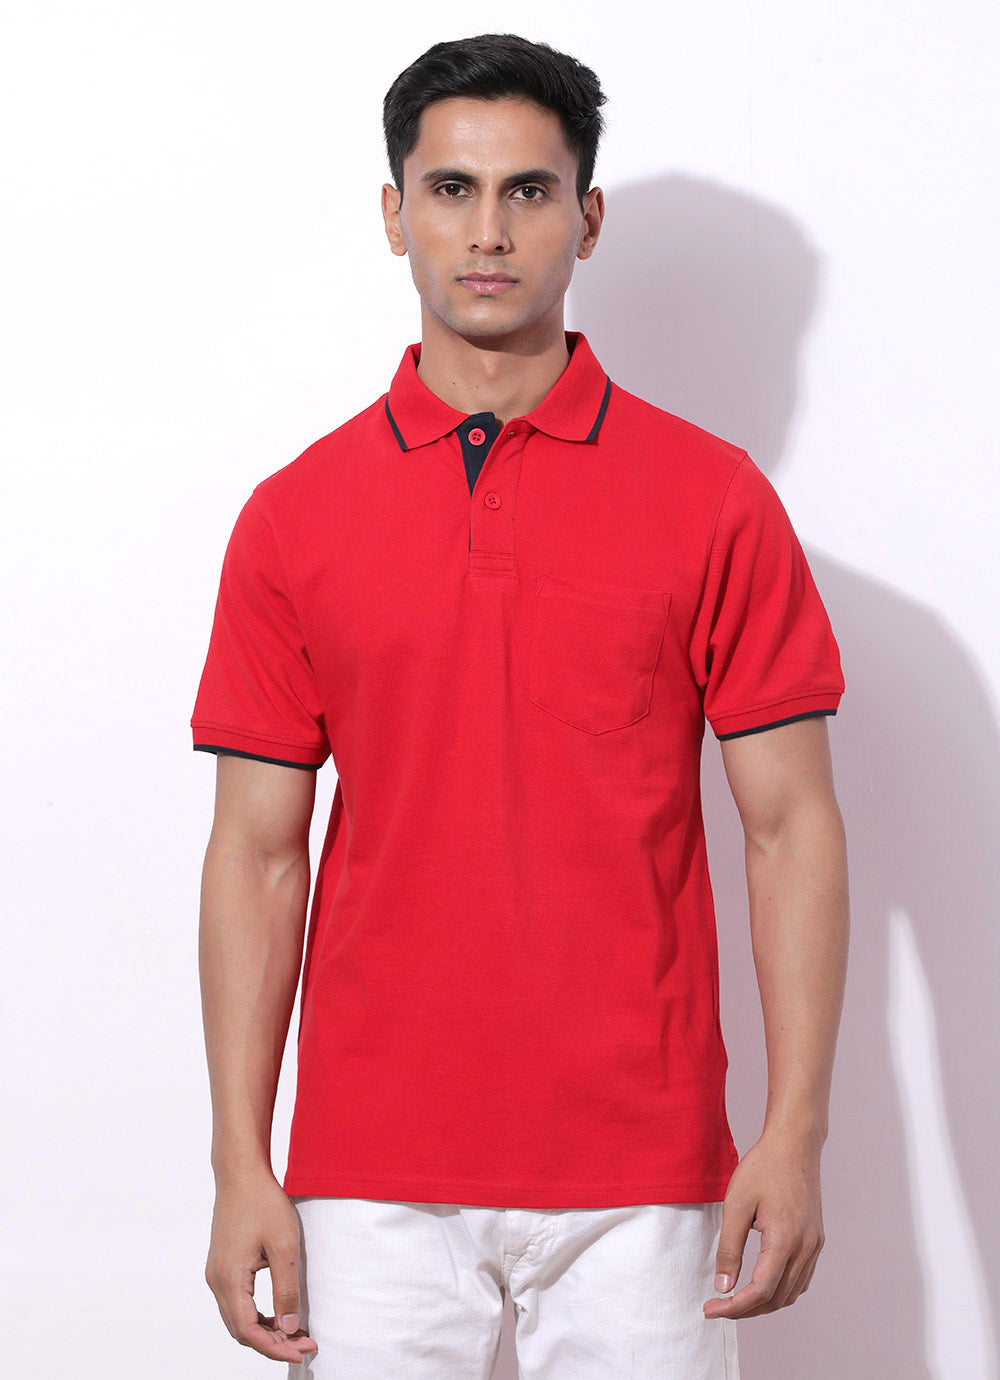 Subtle Red Polo